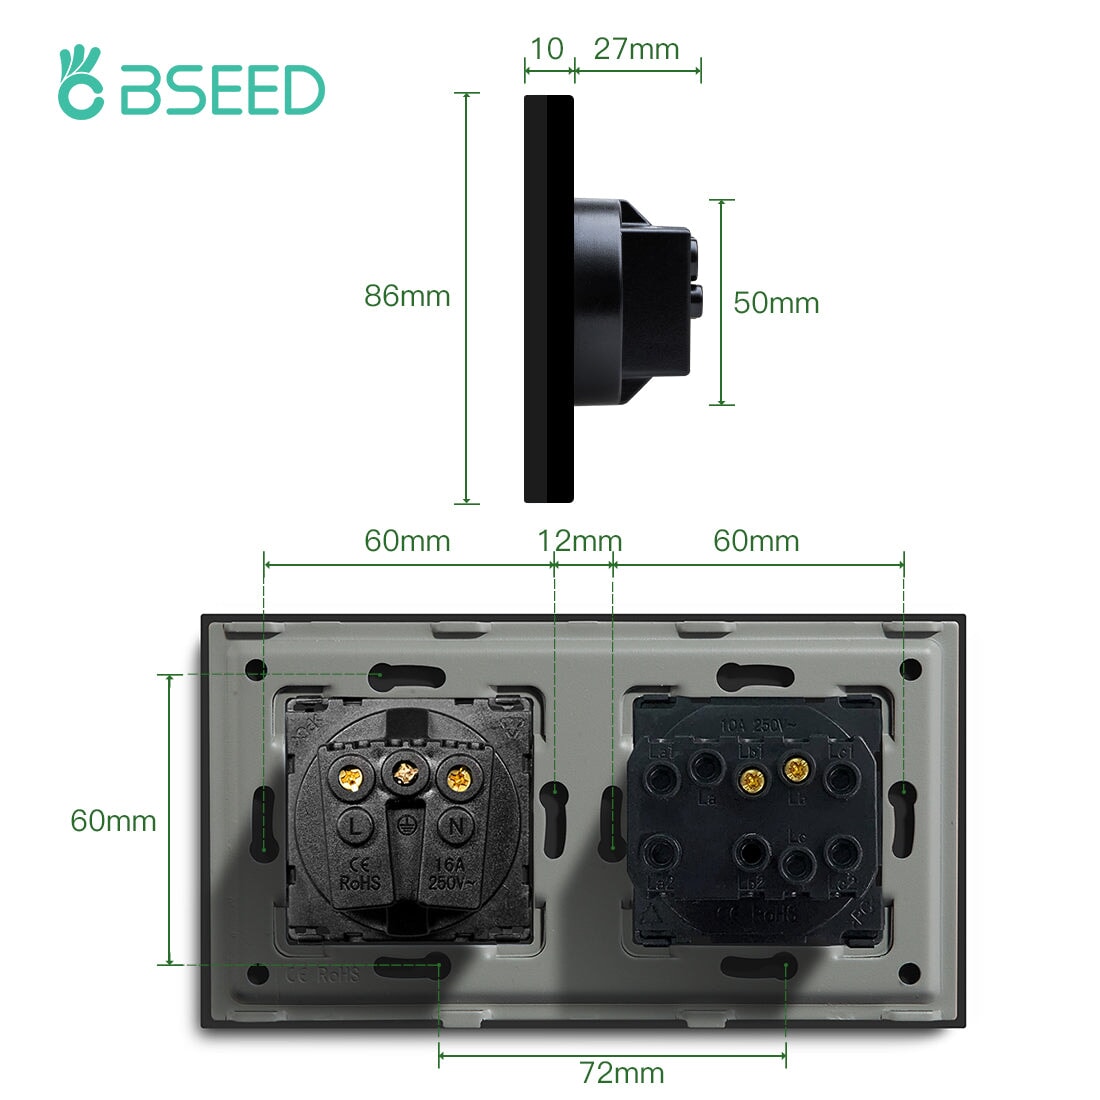 BSEED Mechanical 1/2/3 Gang 1/2Way Touch Light Switch With Normal Eu Socket Power Outlets & Sockets Bseedswitch 